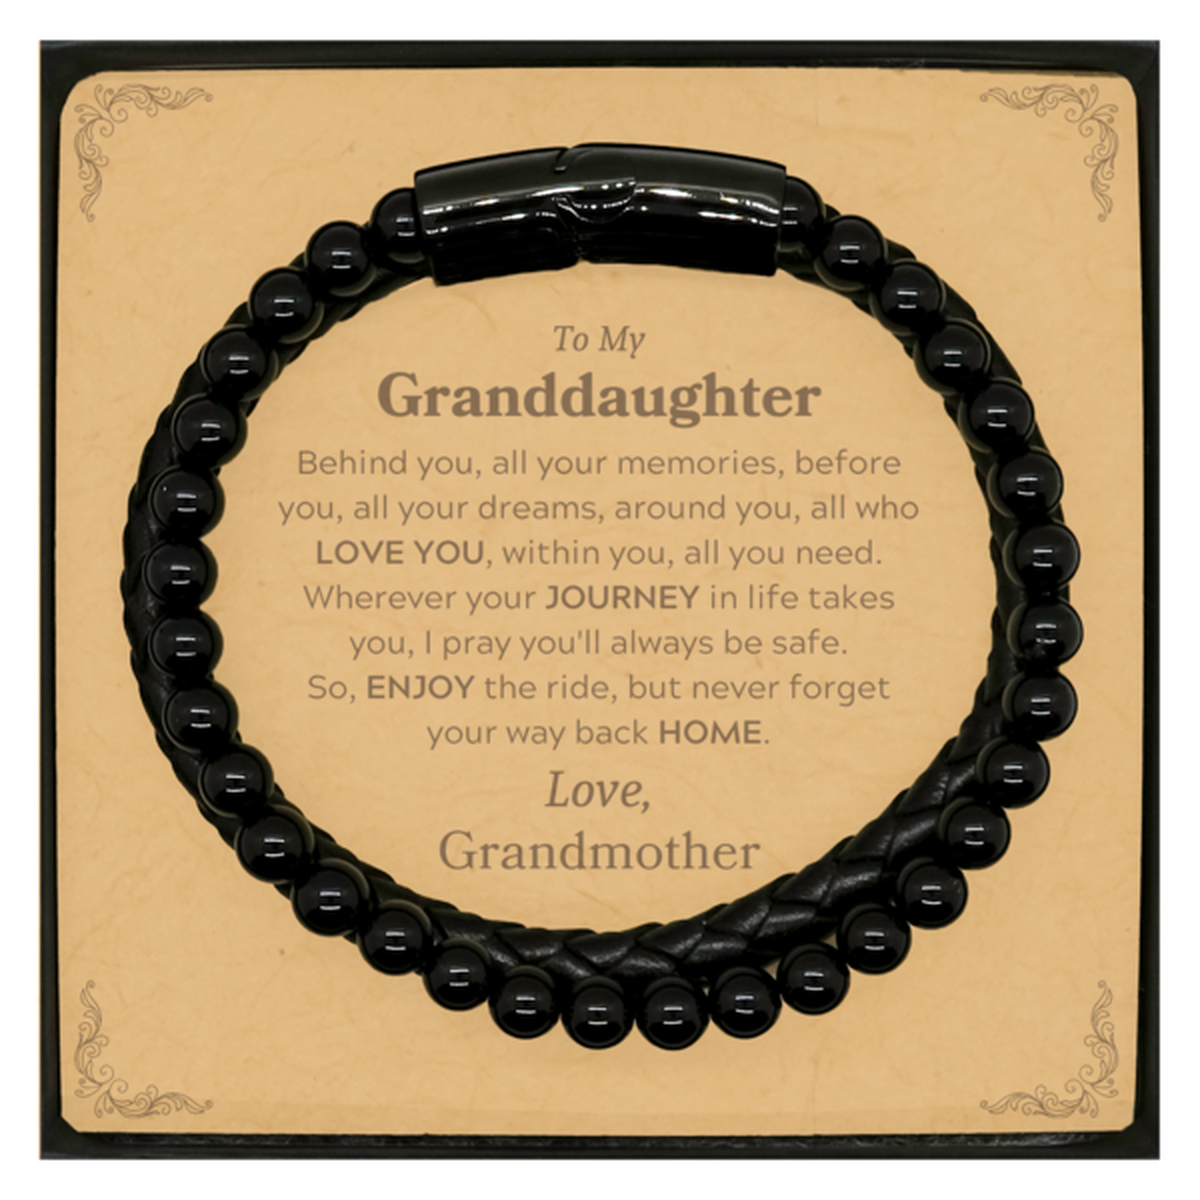 To My Granddaughter Graduation Gifts from Grandmother, Granddaughter Stone Leather Bracelets Christmas Birthday Gifts for Granddaughter Behind you, all your memories, before you, all your dreams. Love, Grandmother